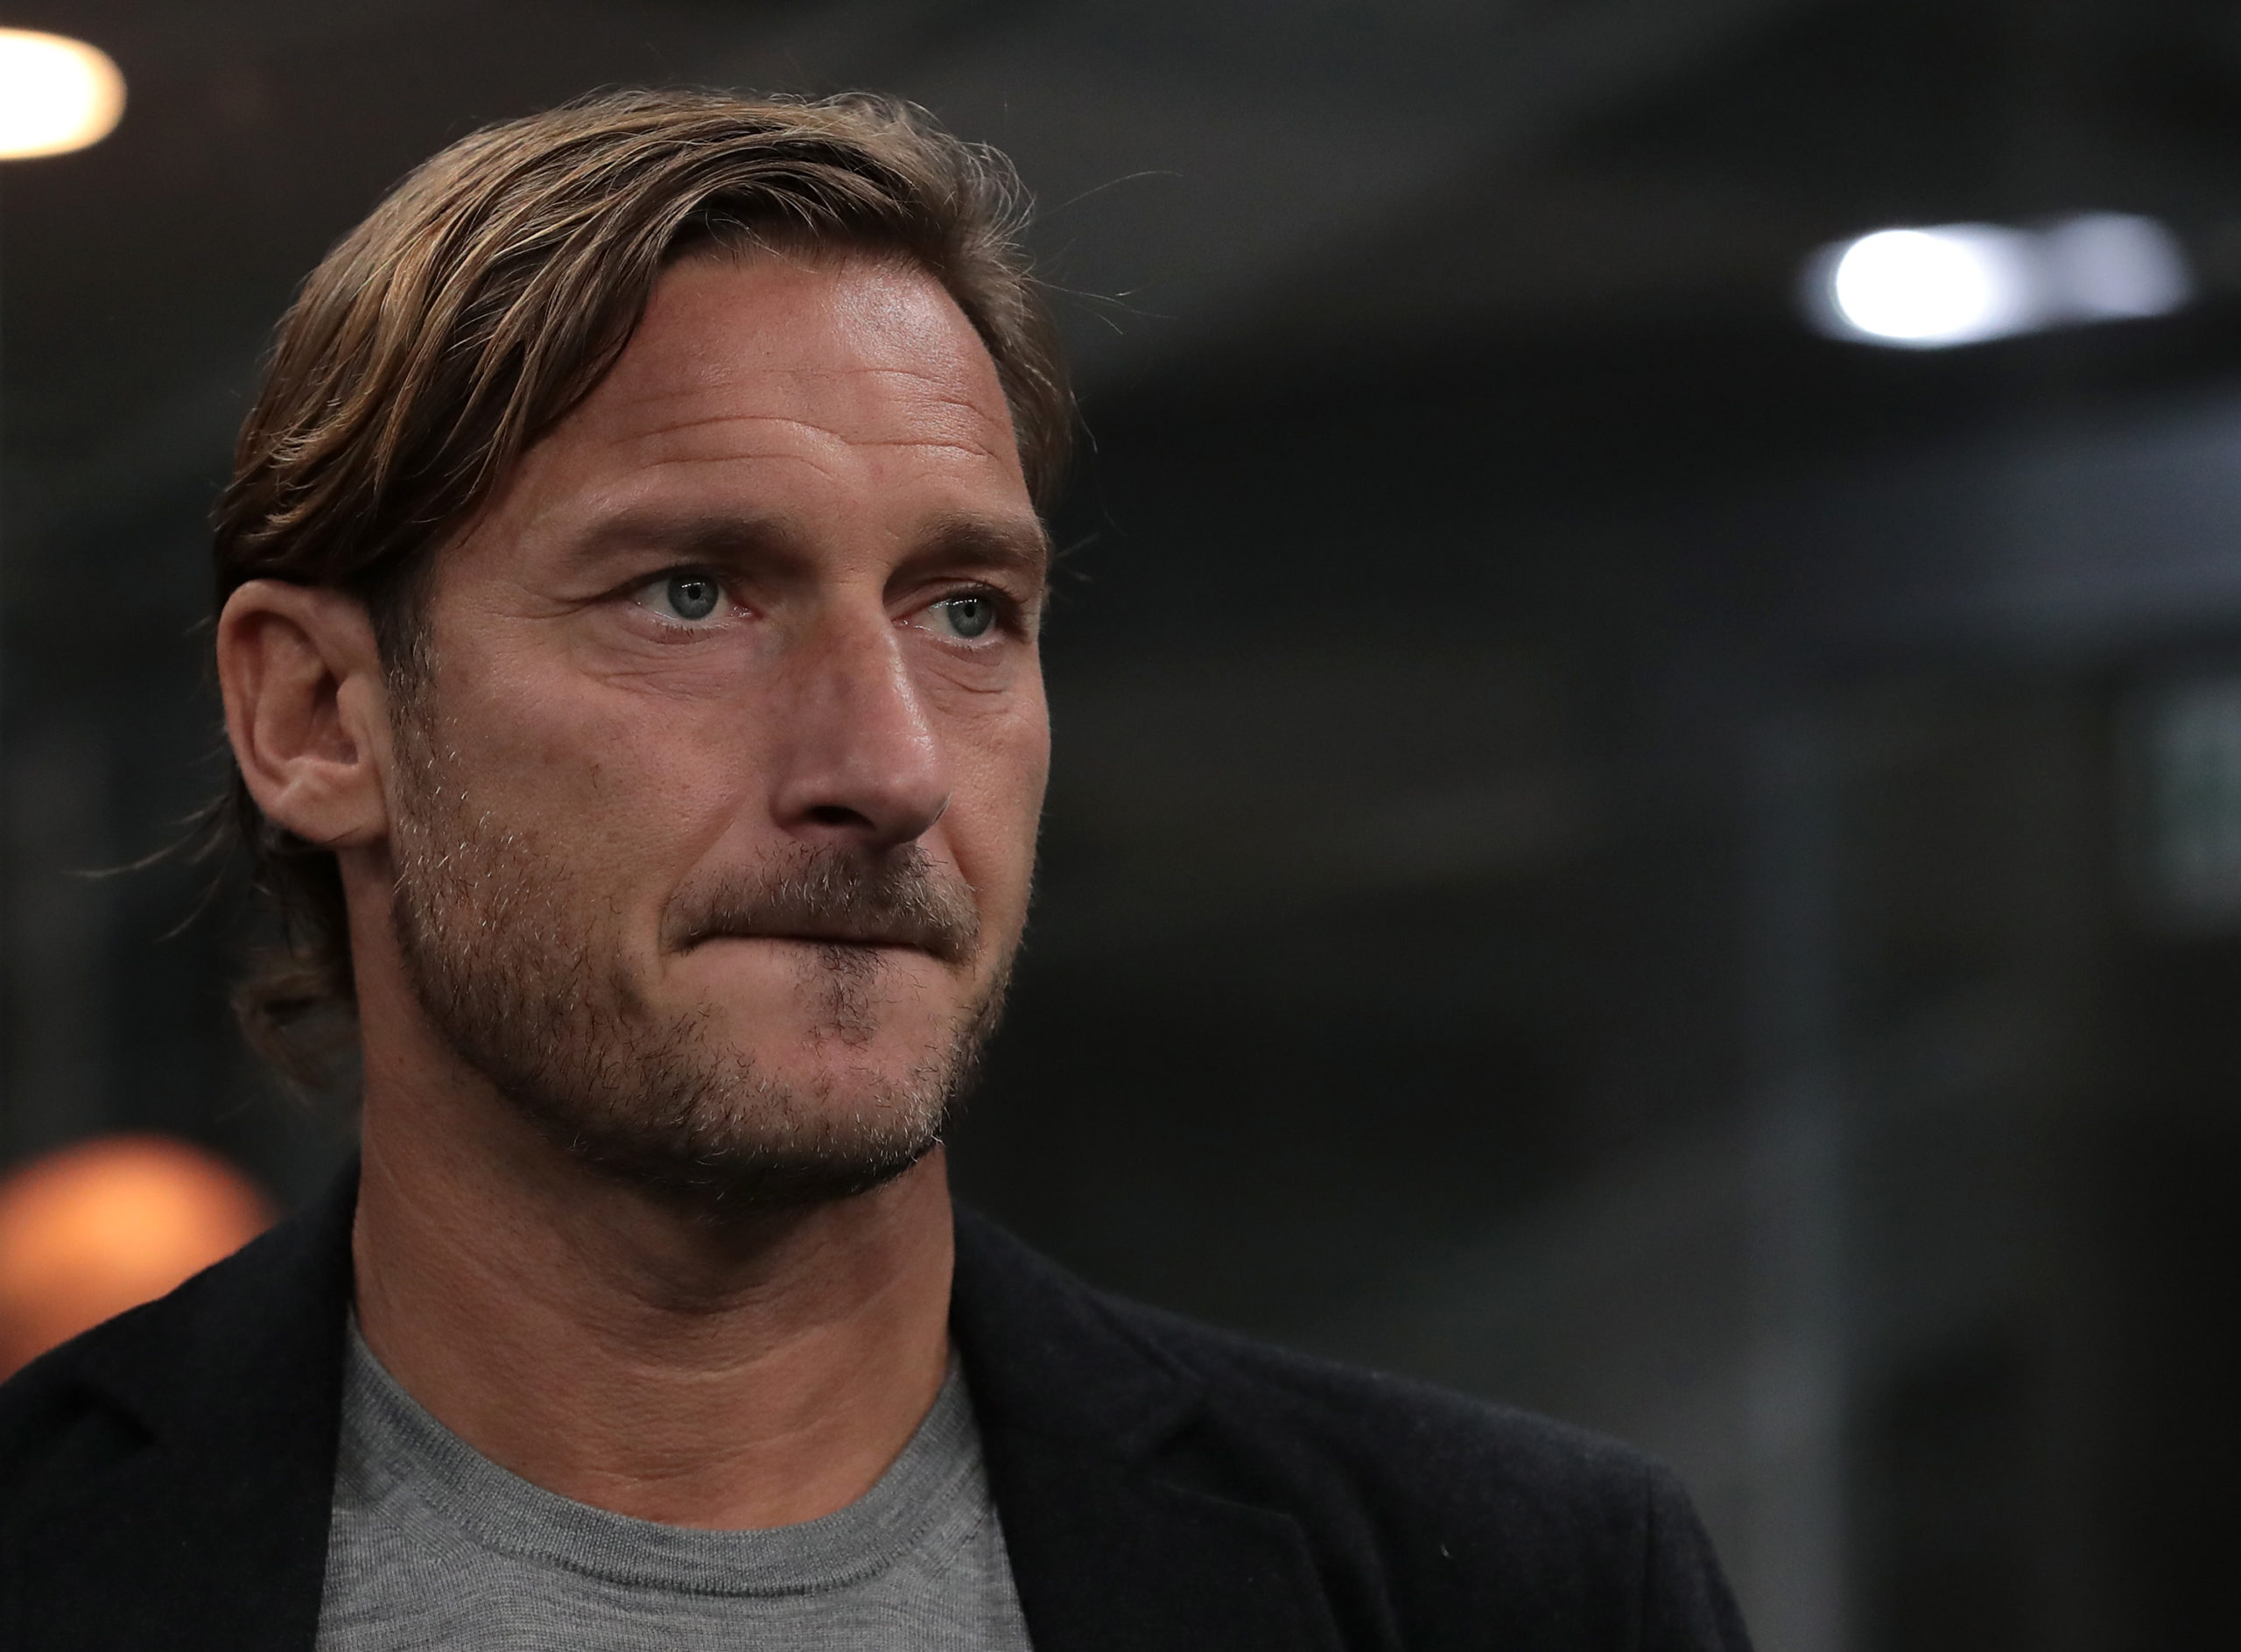 Francesco Totti continues to campaign for his return to the Roma management but admitted that the club wasn't on the same page